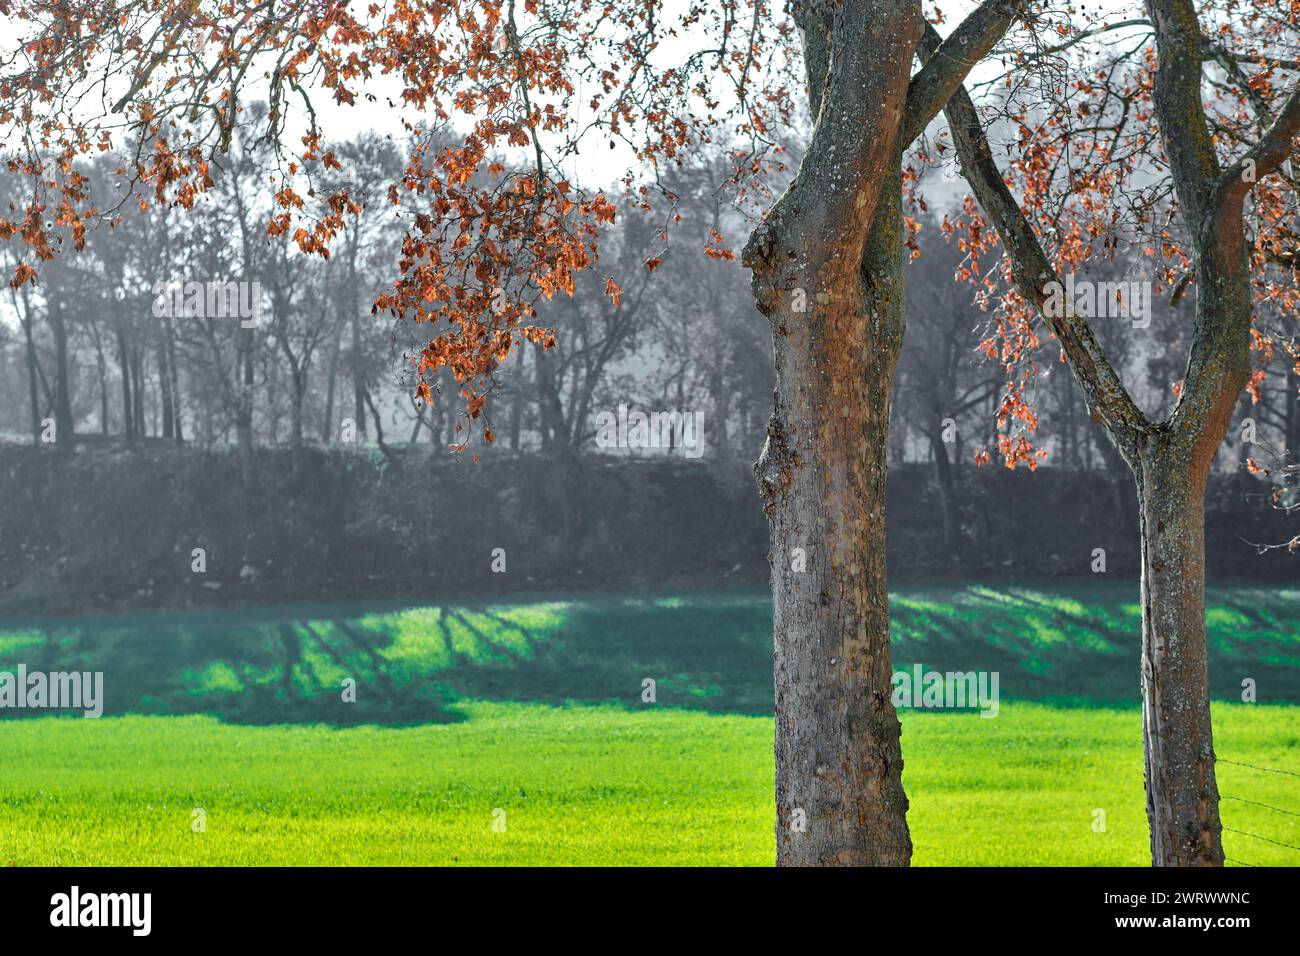 Landscape of London plane tree trunks in autumn and cultivated plot. Stock Photo